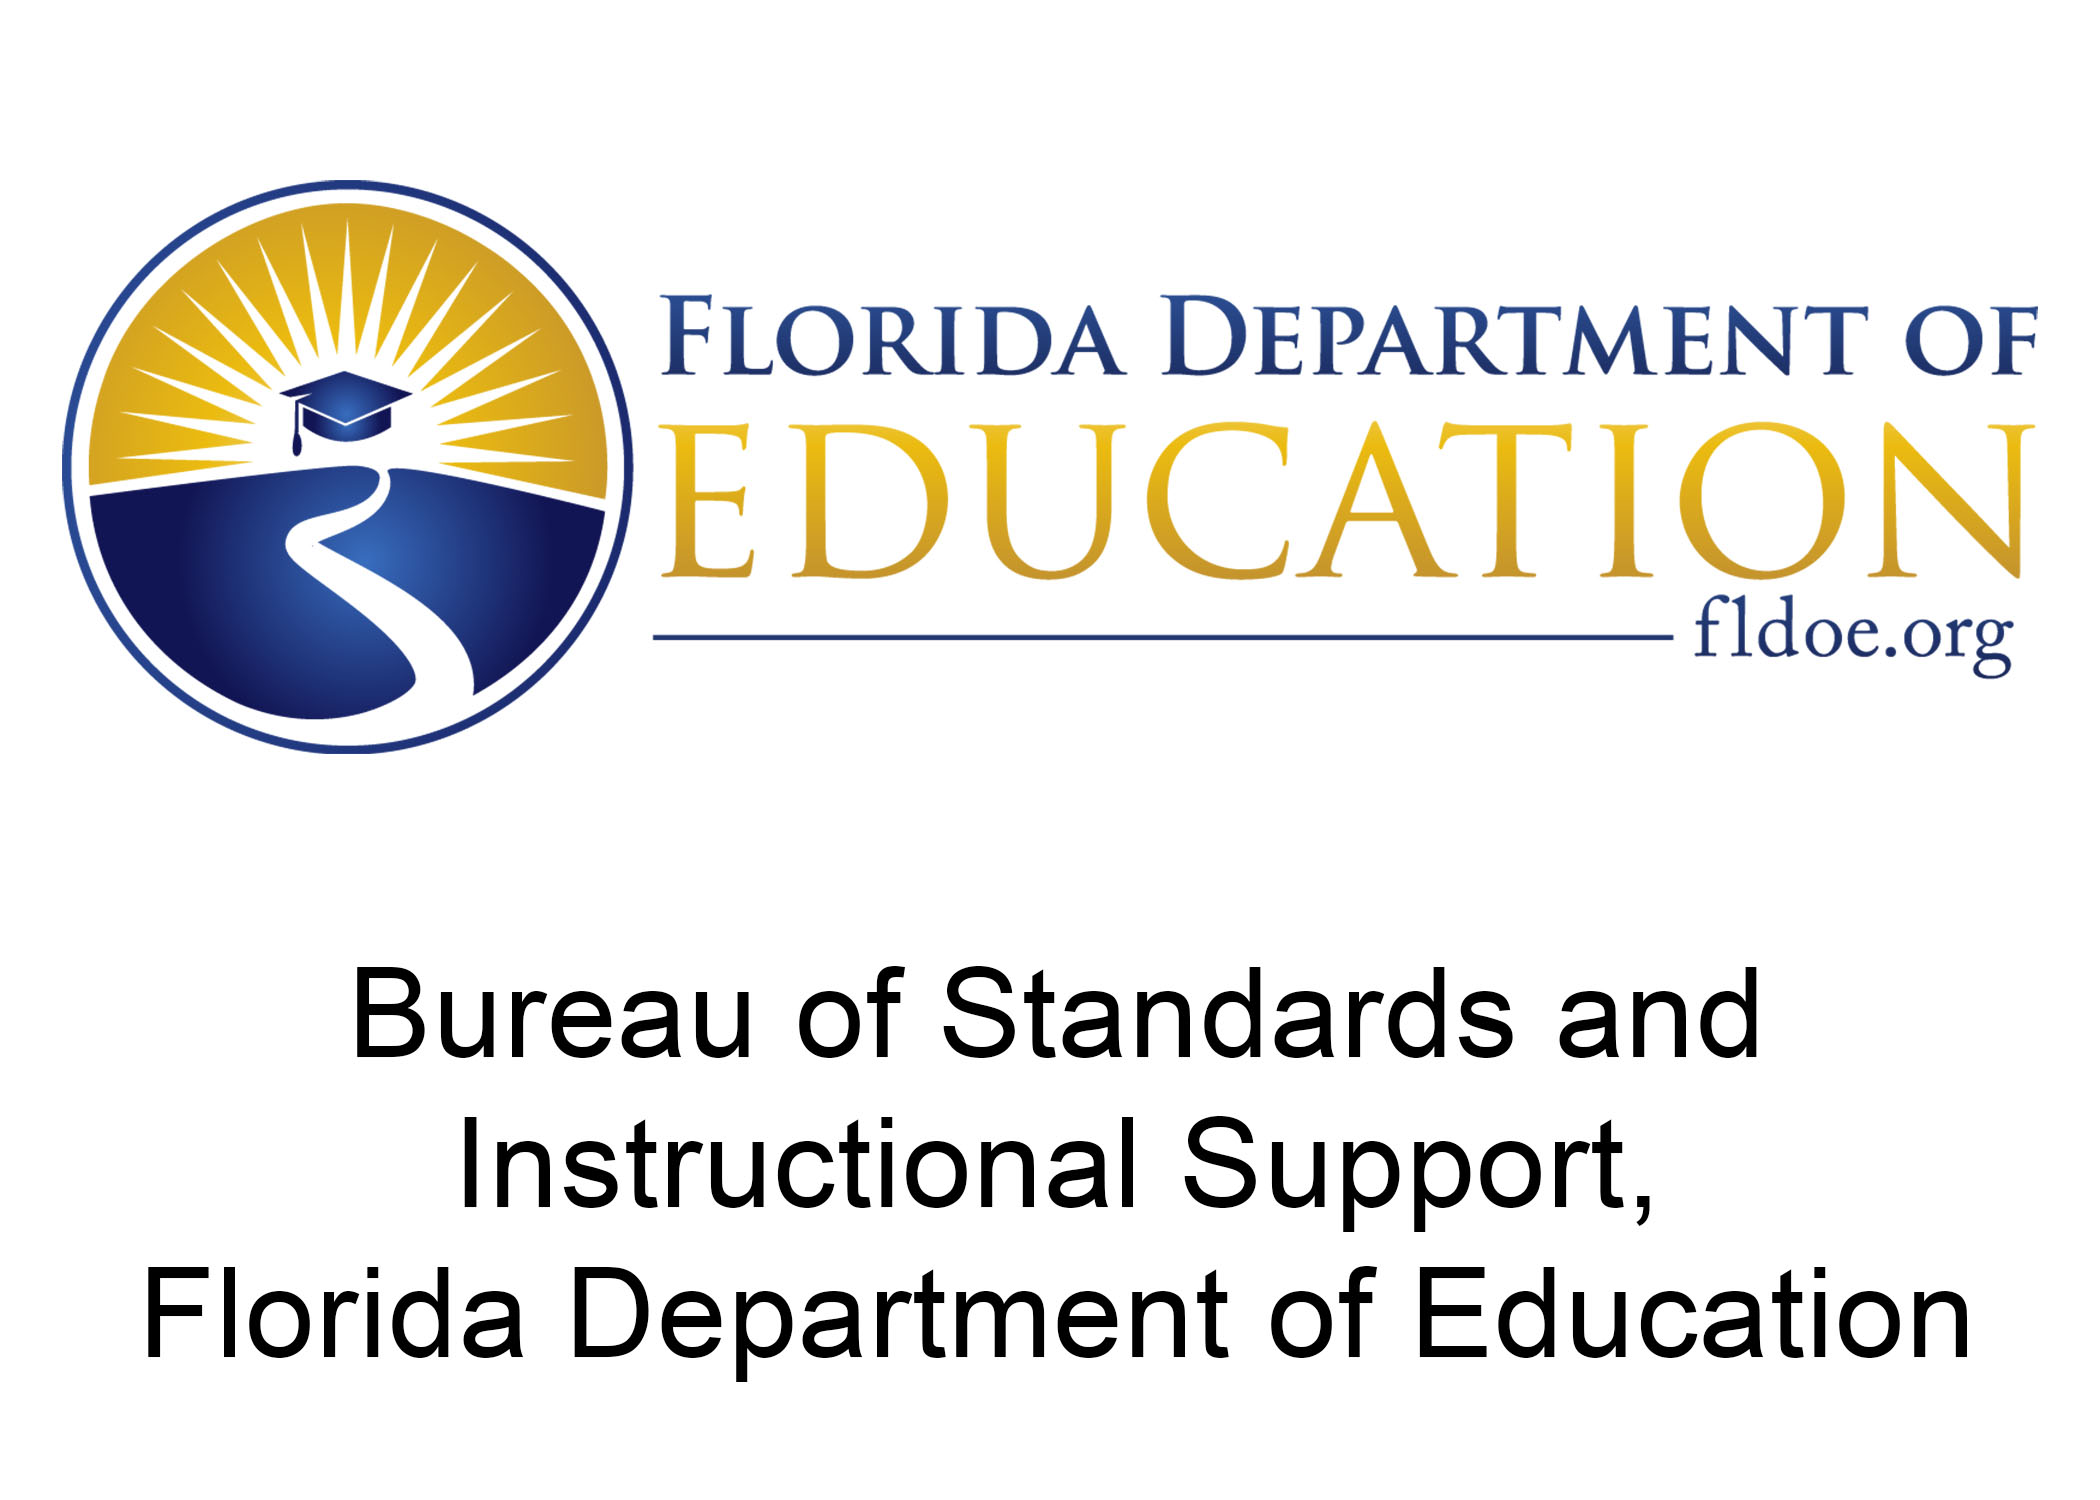 Bureau of Standards and Instructional Support